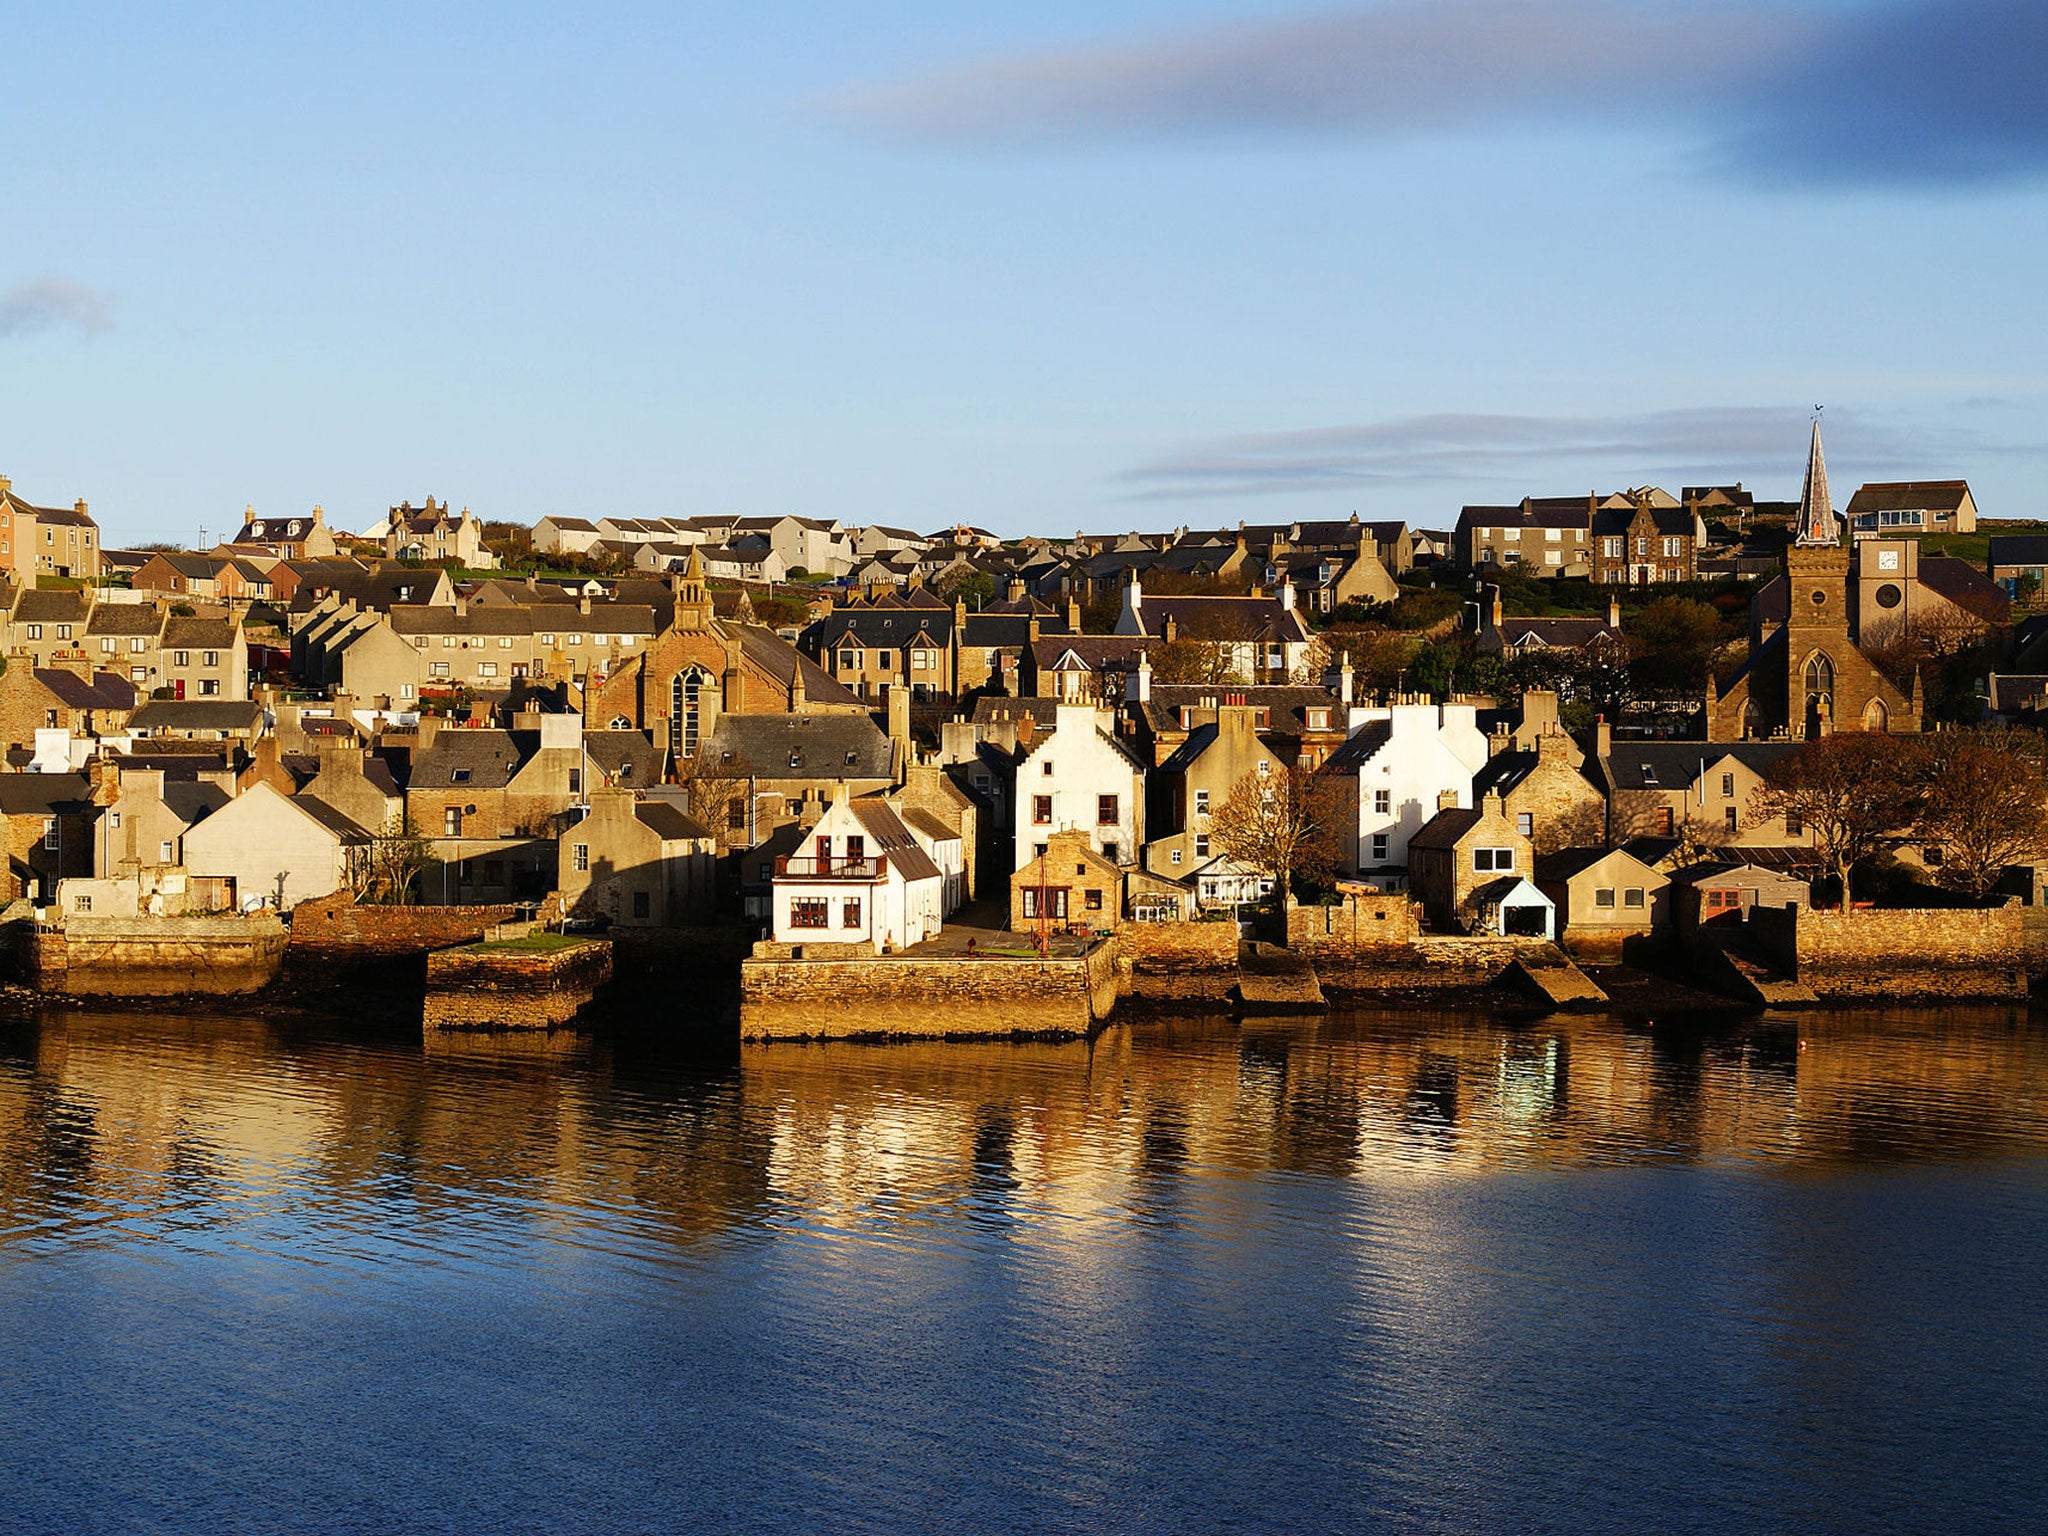 The town of Stromness, on the Orkney Islands